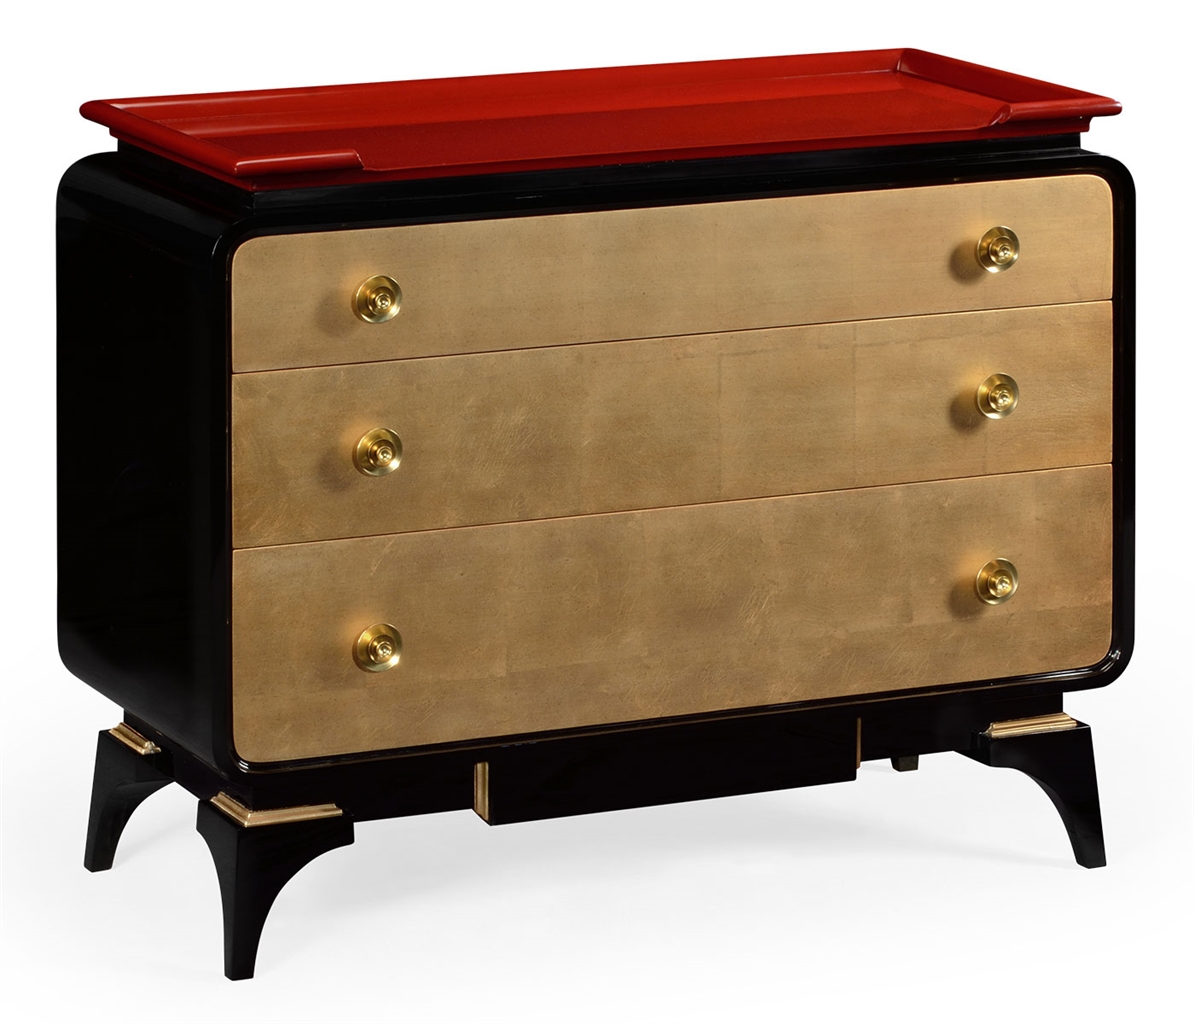 Modern Furniture Emperor Chest of Drawers